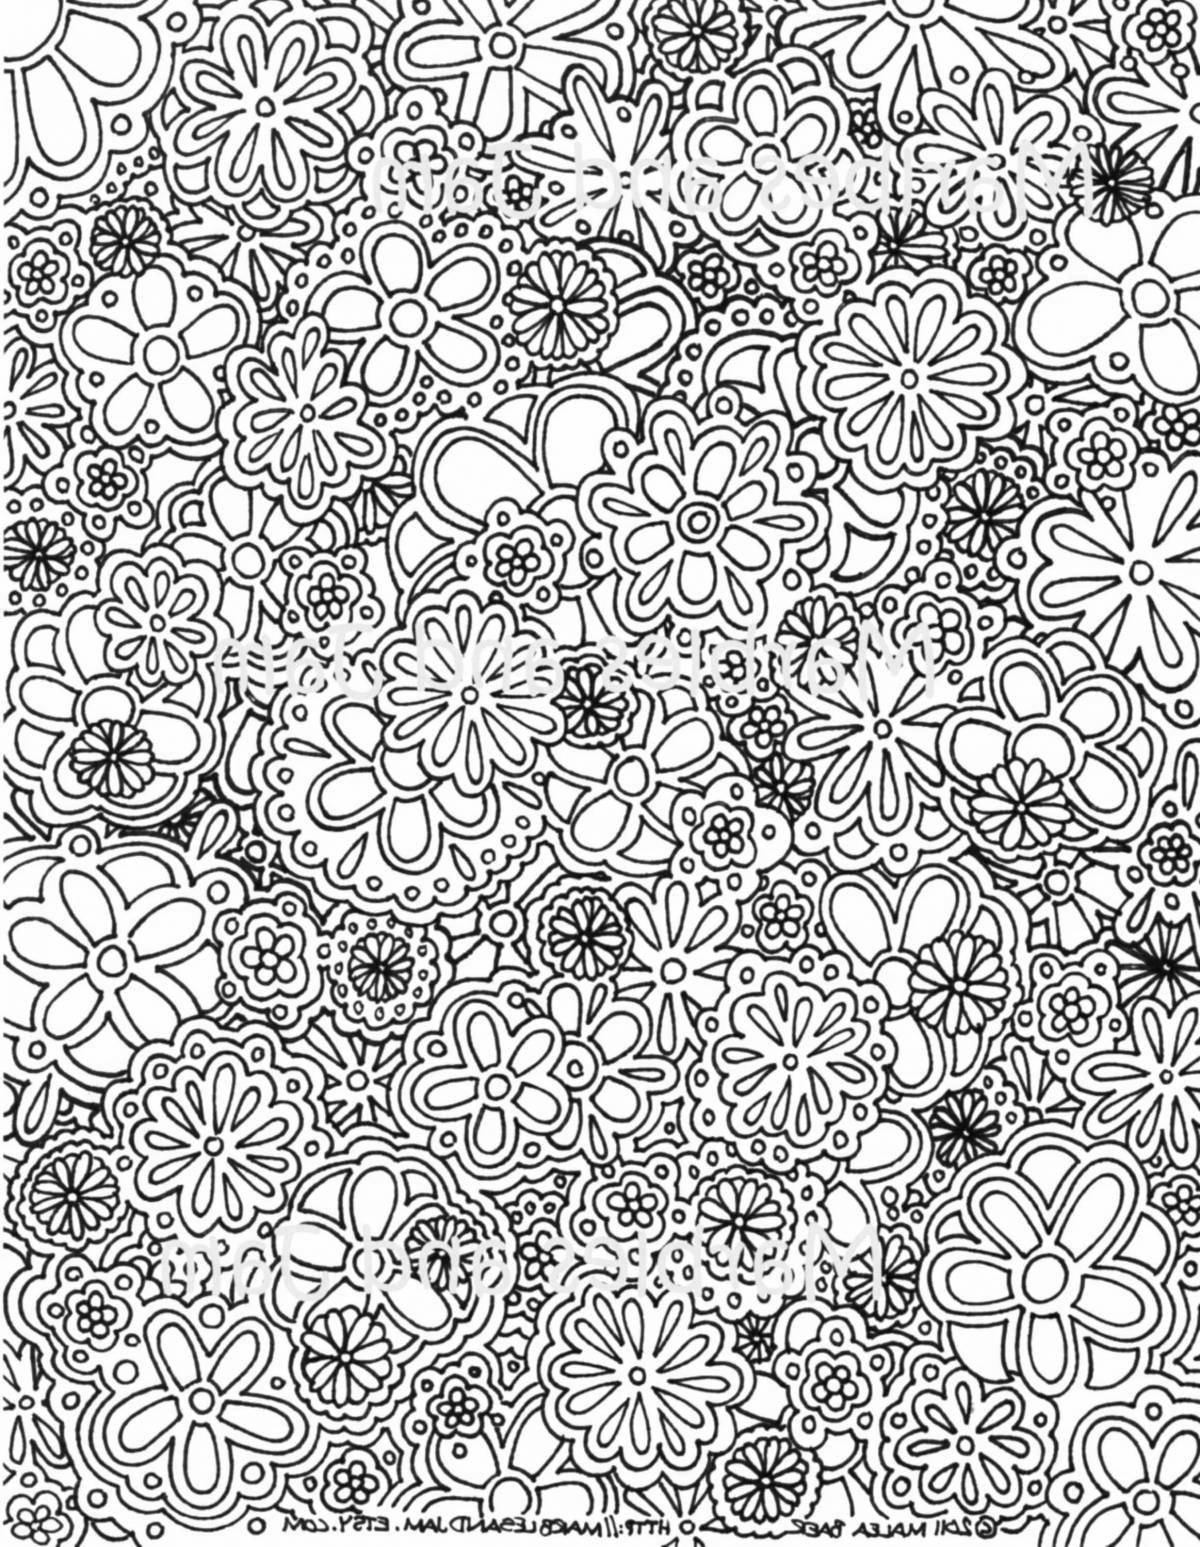 Hypnotic coloring page background